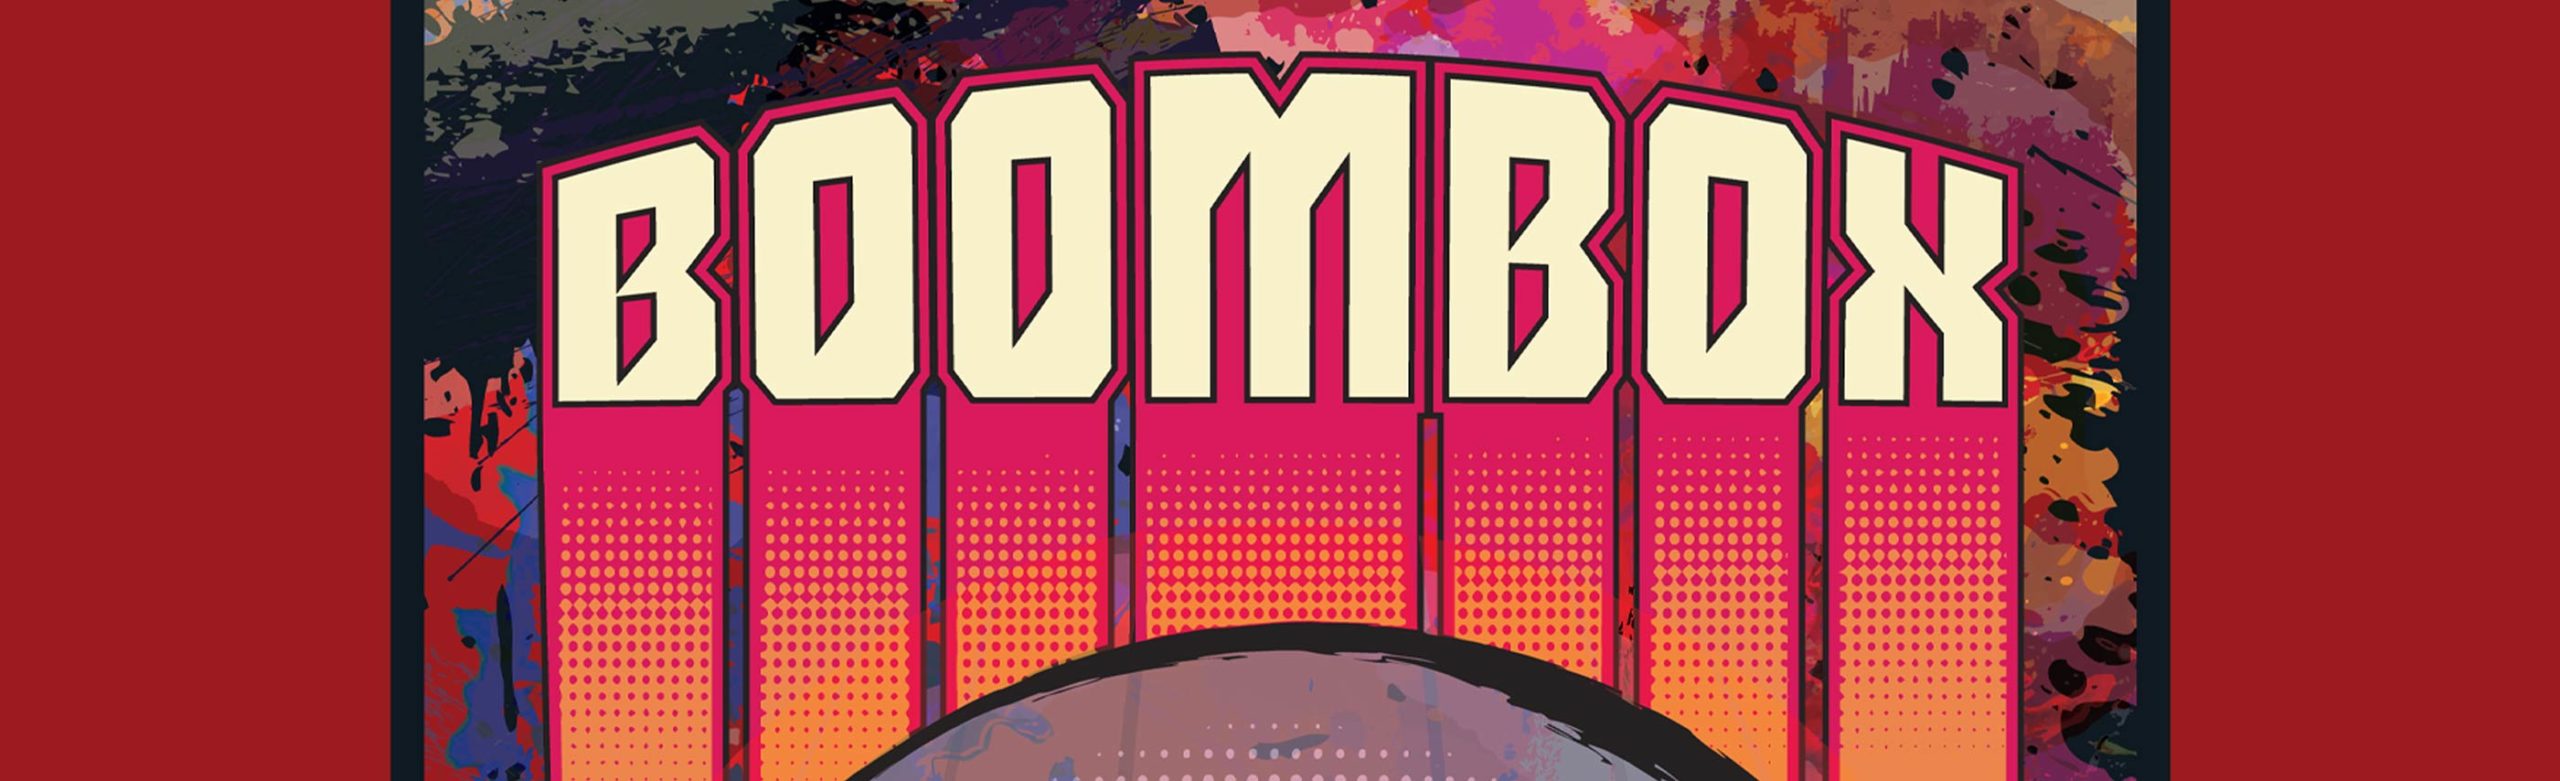 BoomBox Announces Concerts at The ELM and The Top Hat Image